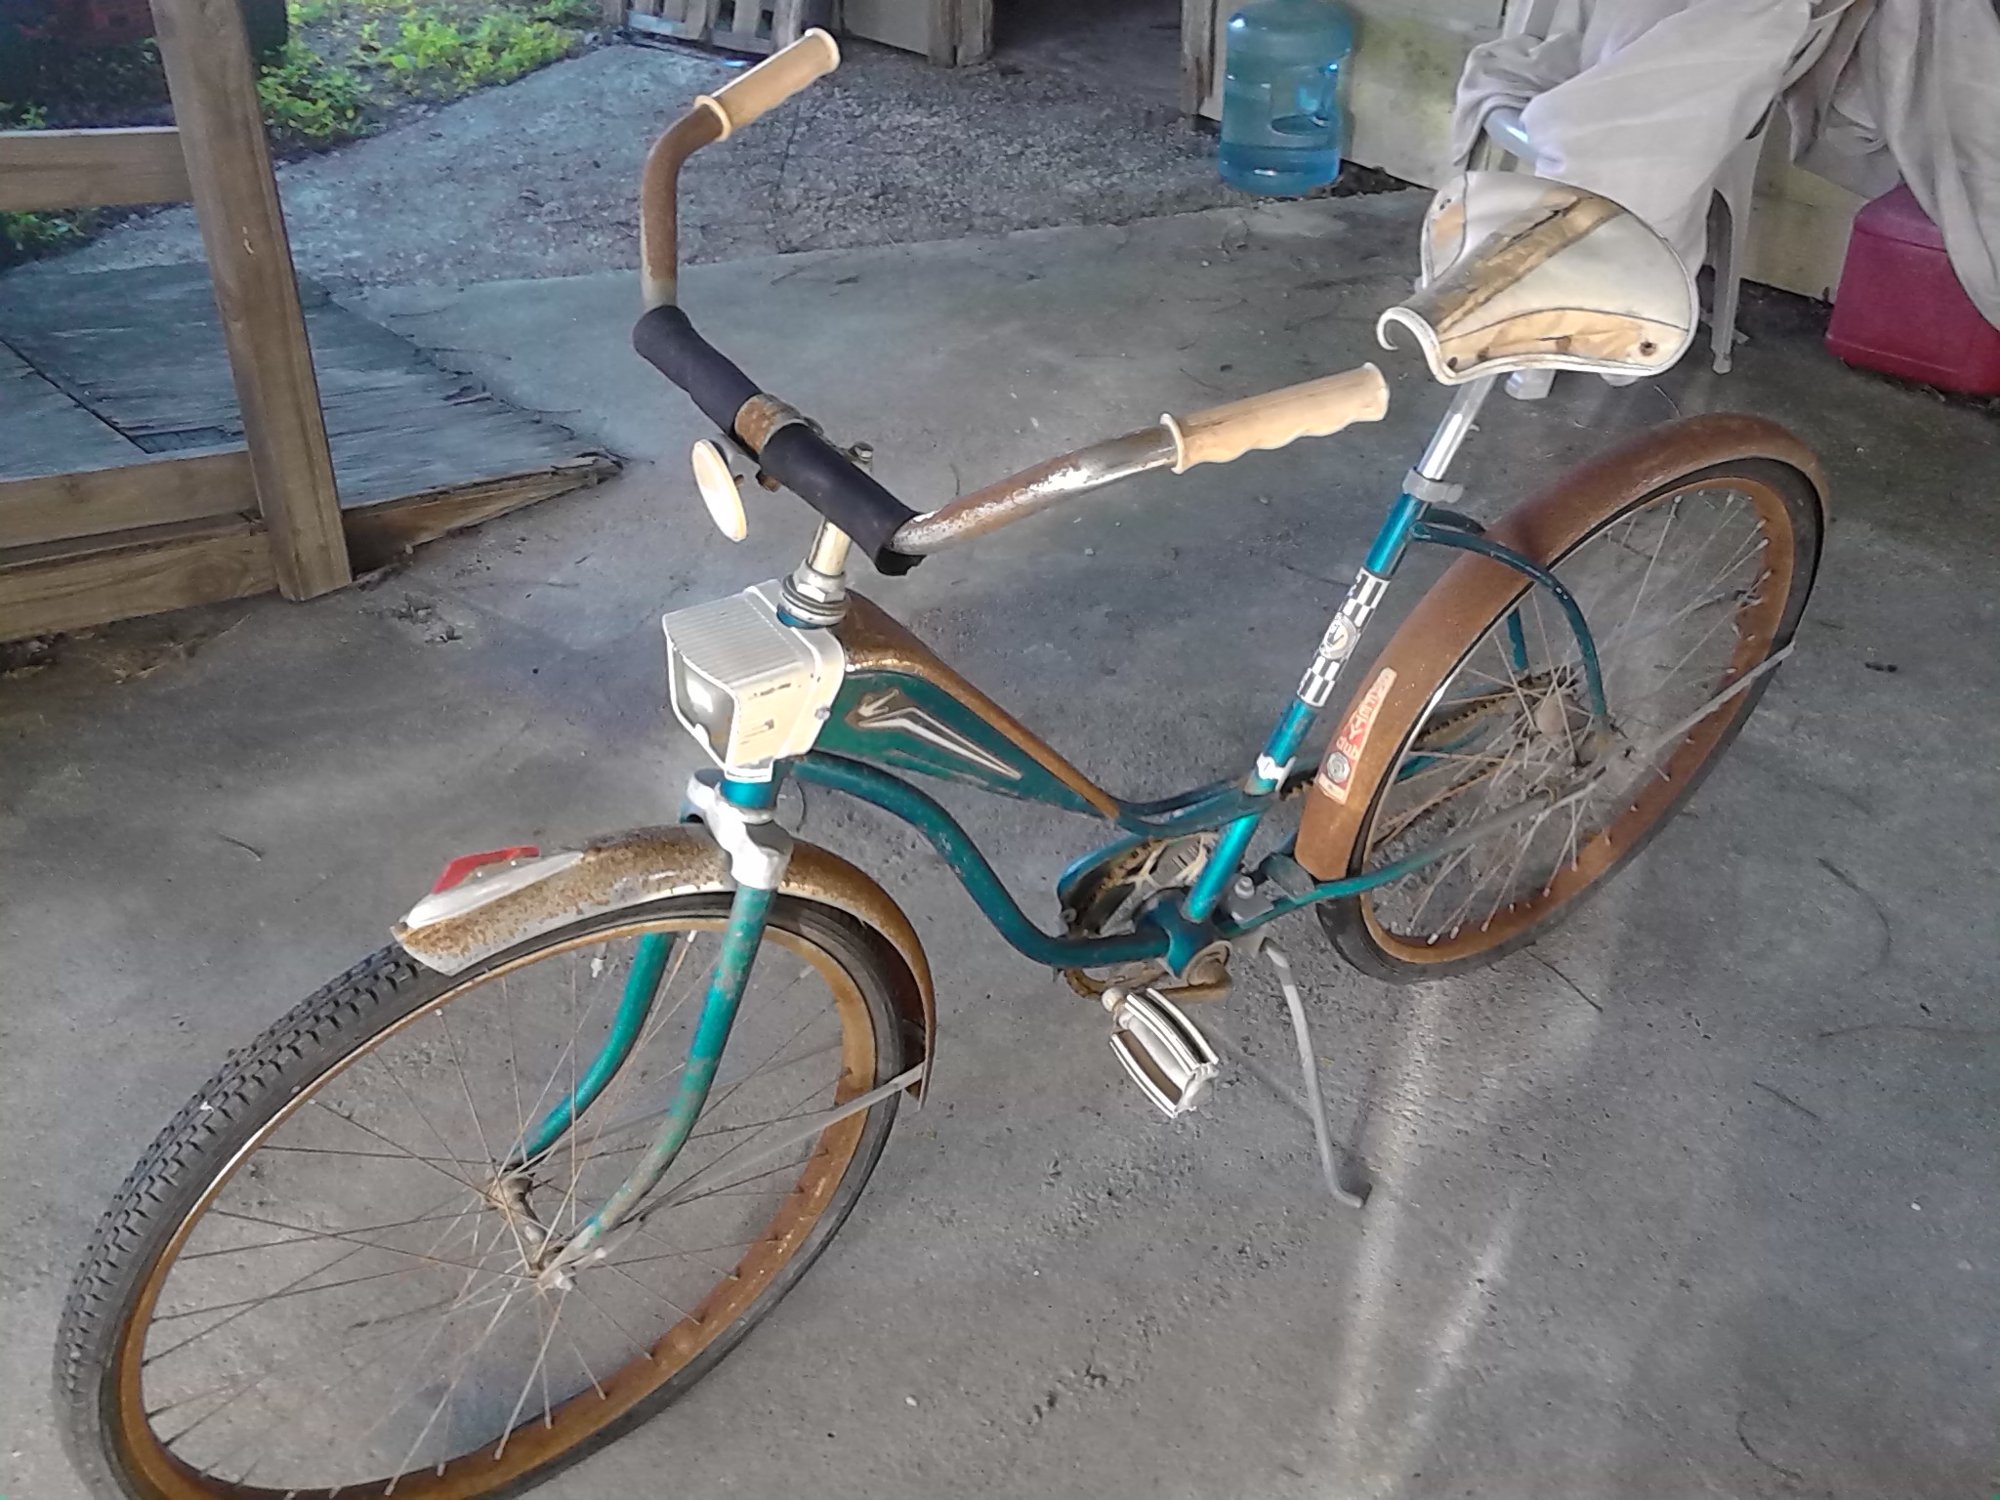 Aquired this vintage Stelber bicycle, Wondering it's value and other ...